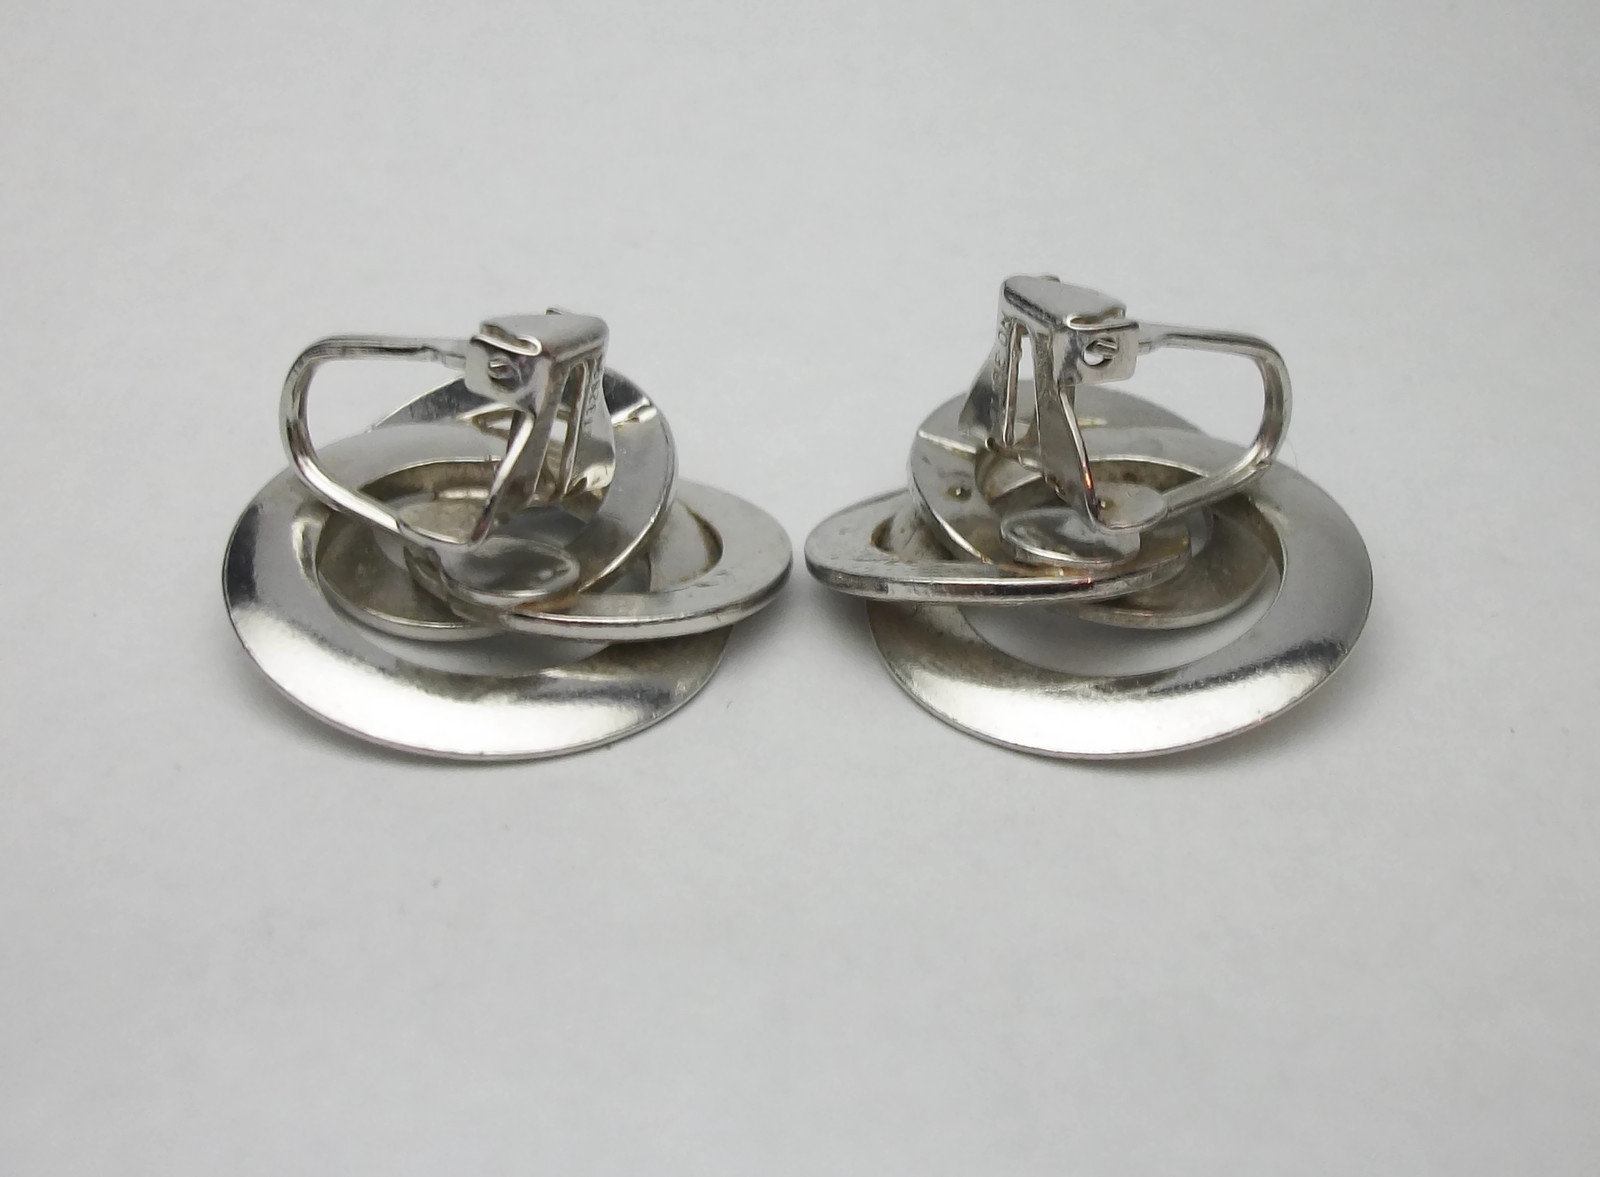 Vintage 1950s Signed Coro Silver Tone Entwined Circles Clip on Earrings ...